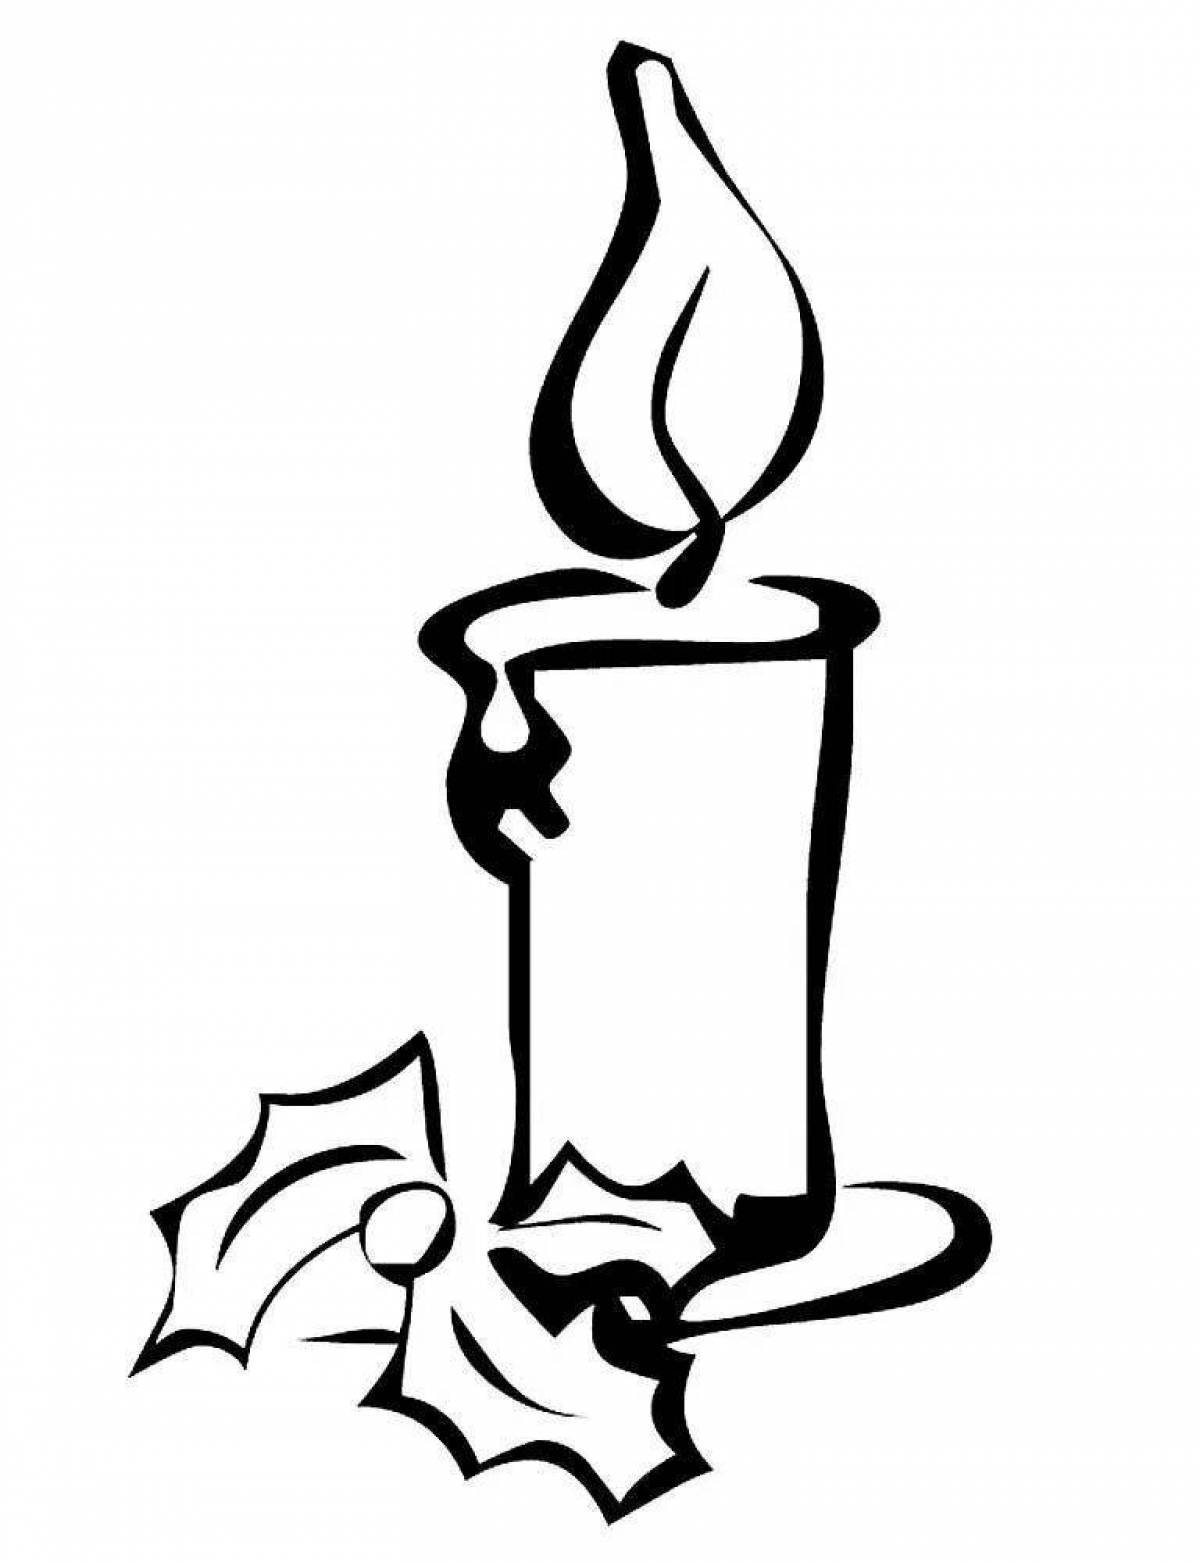 Candles of Remembrance Coloring Page